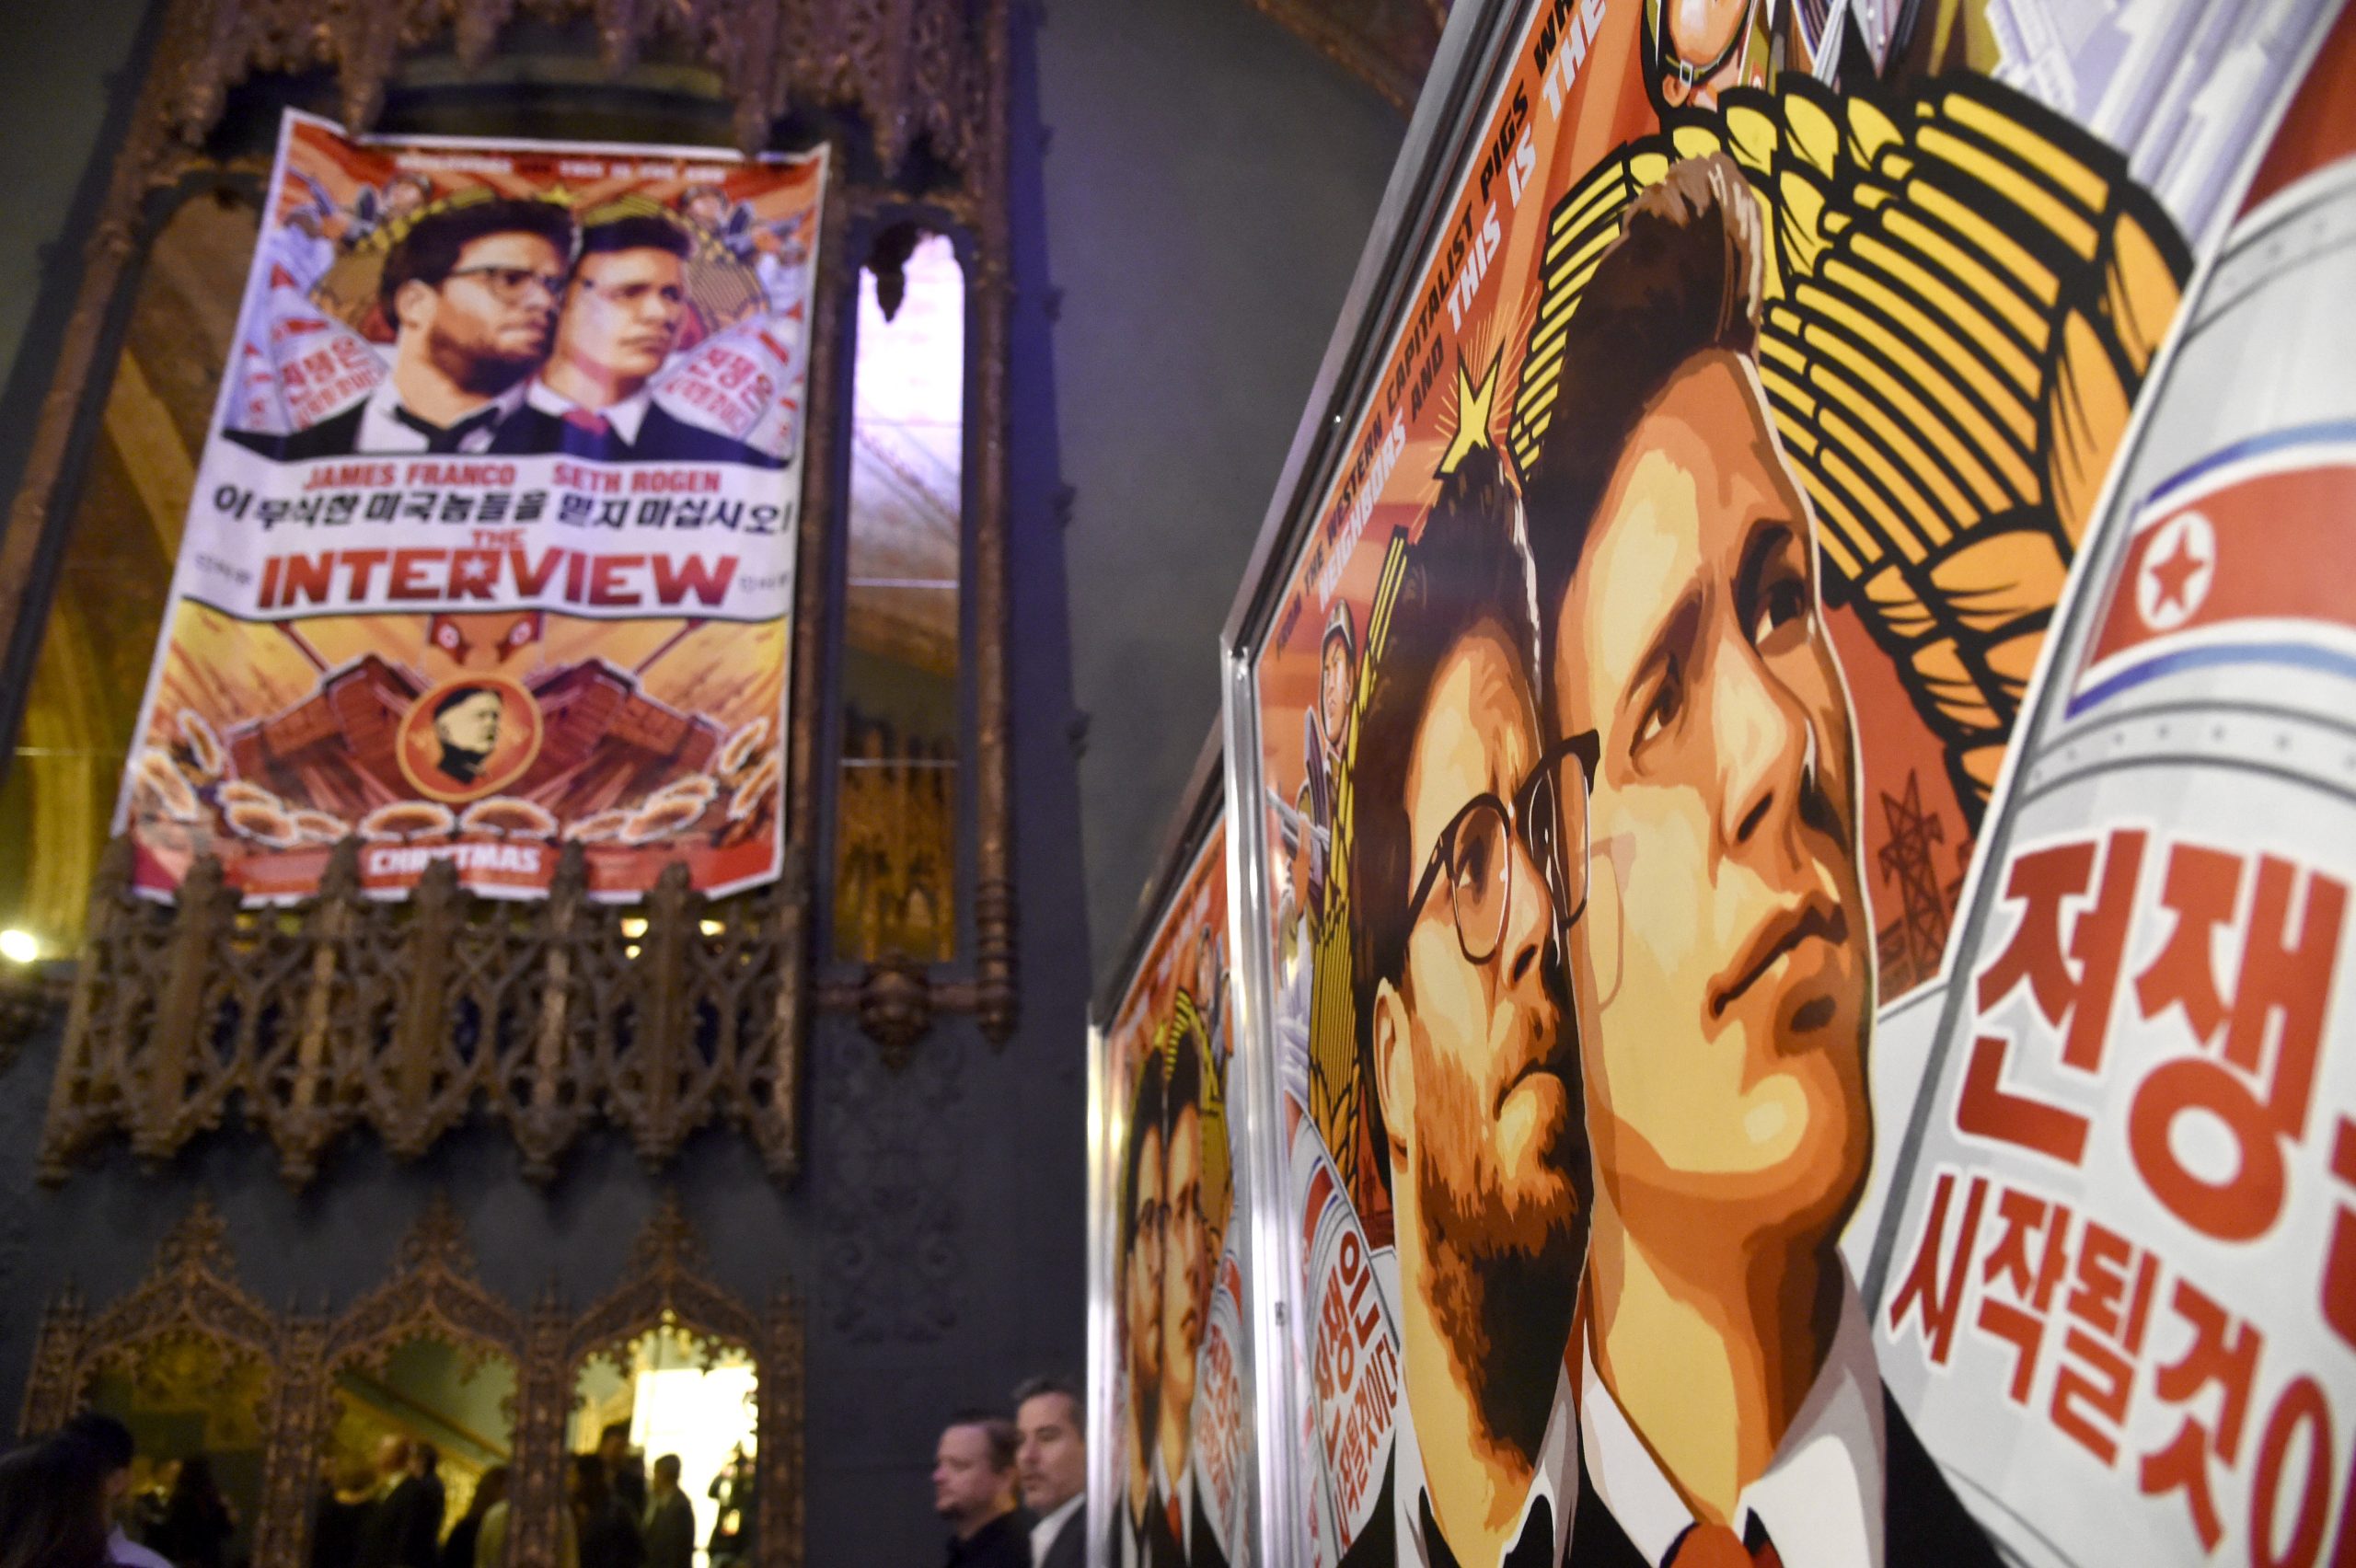 Premiere Of Columbia Pictures' "The Interview" - Arrivals